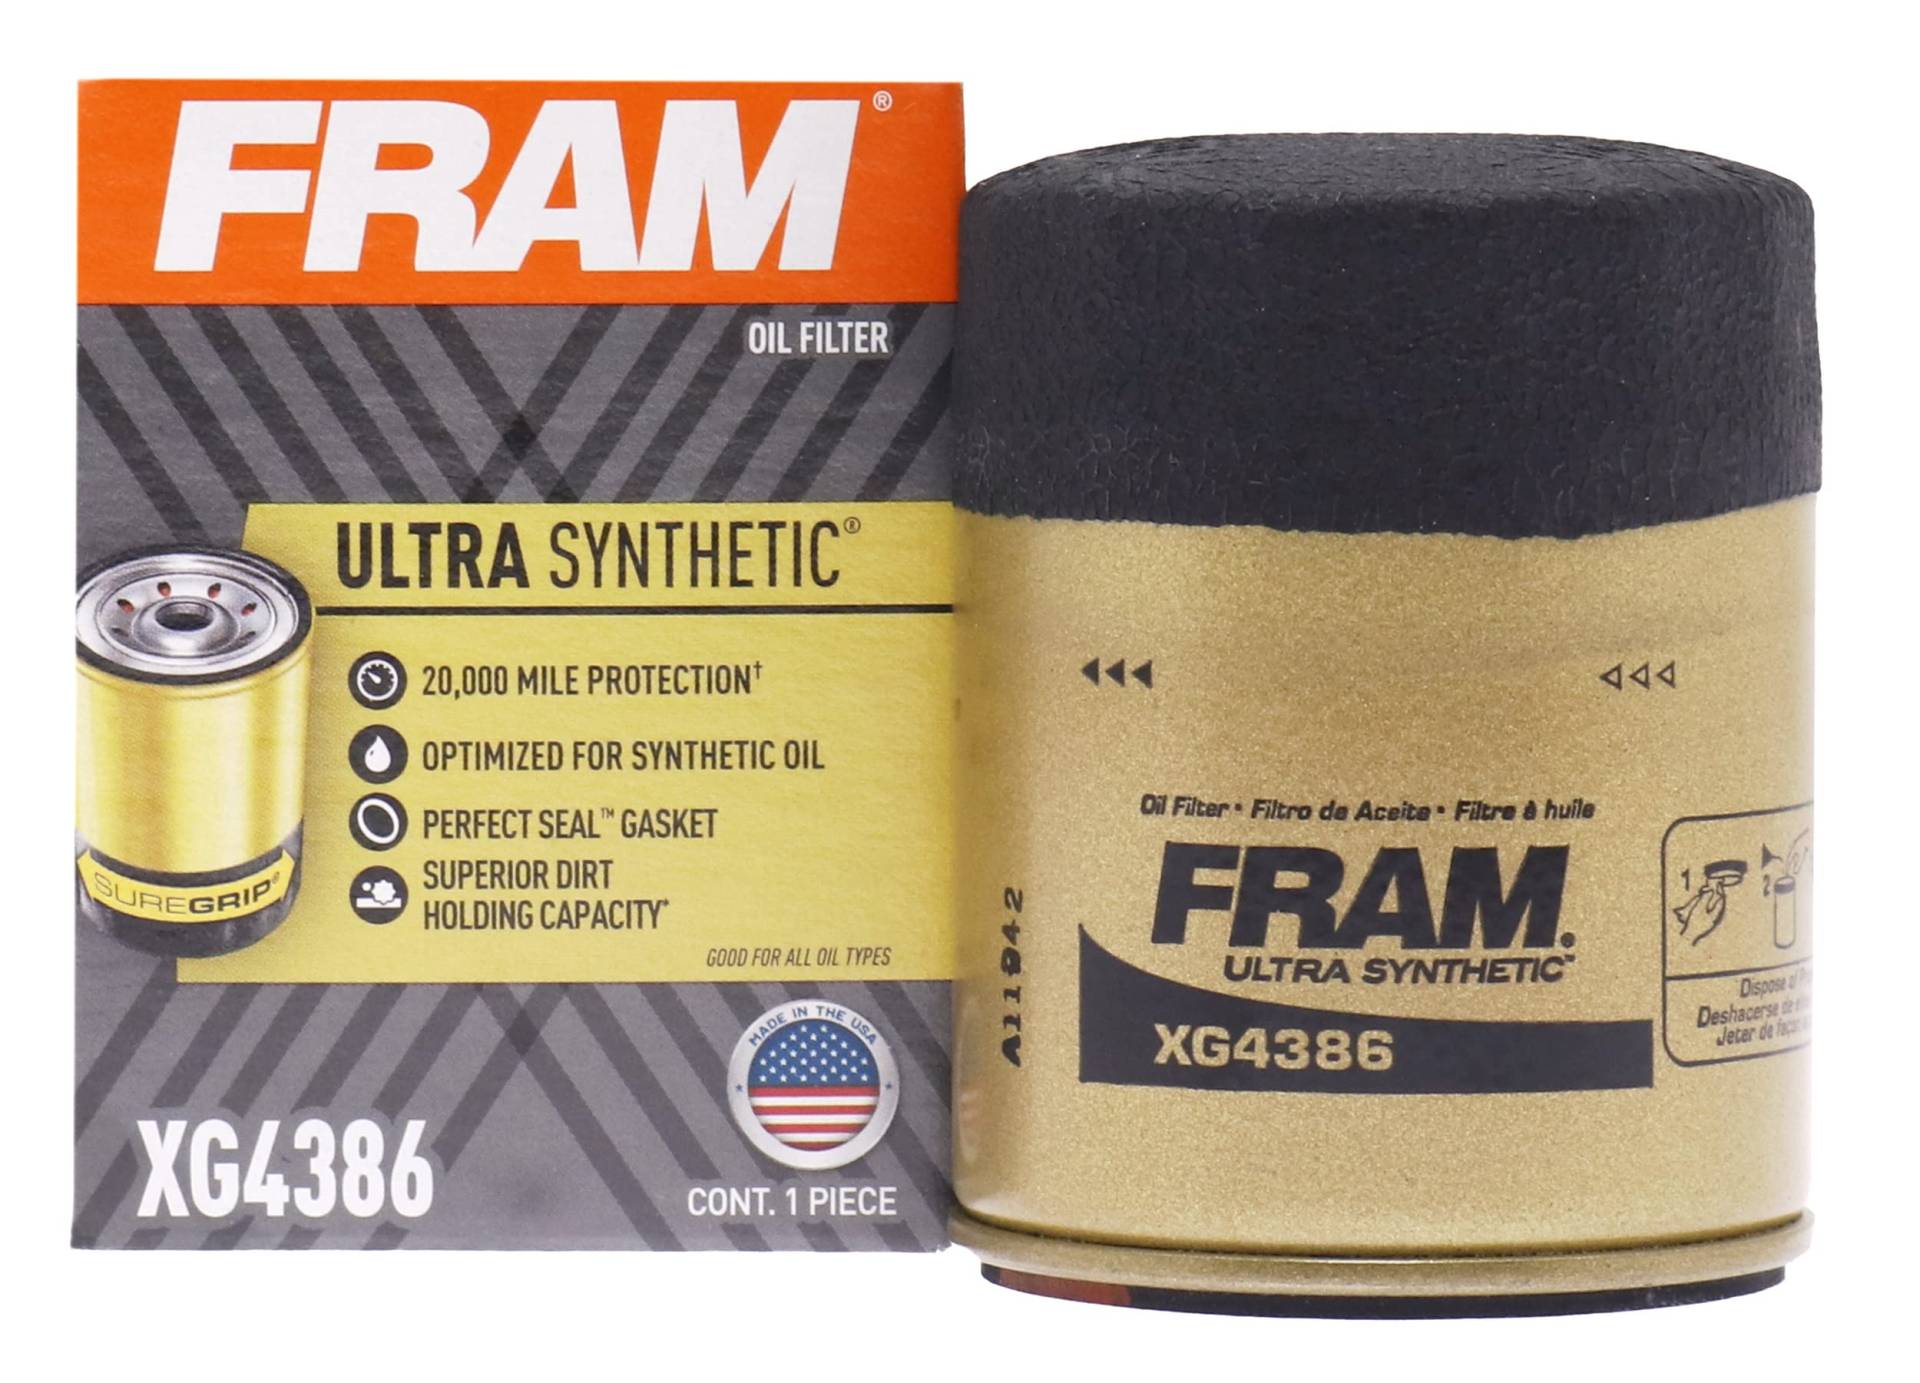 FRAM Ultra Synthetic 20.000 Mile Protection Oil Filter XG4386 with SureGrip (1 Stück) von Fram